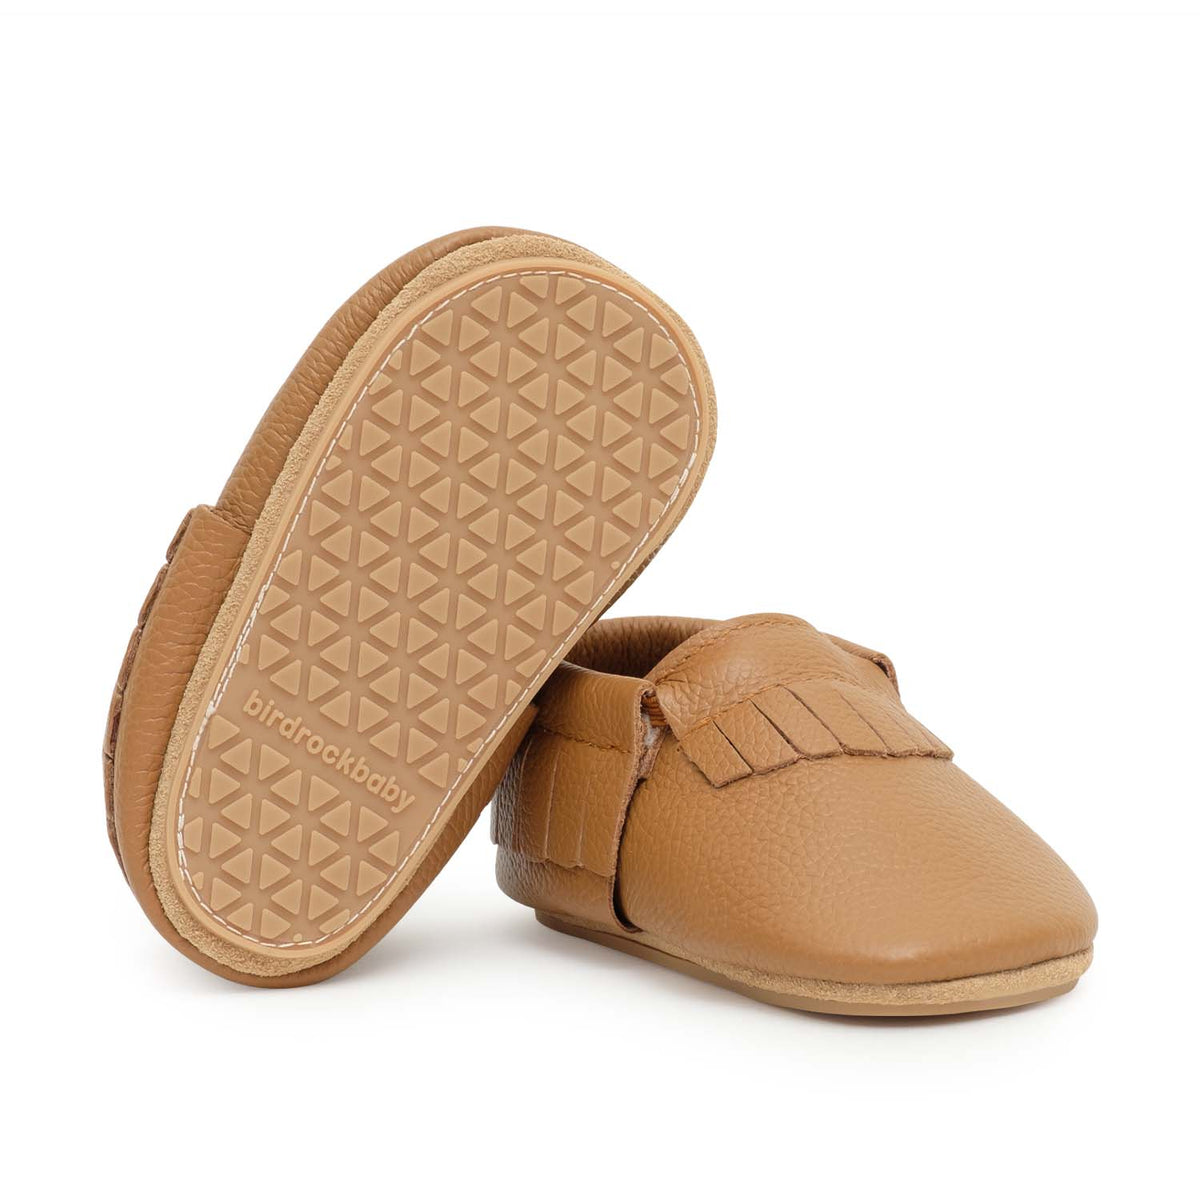 Classic Brown Hard Sole Moccasins